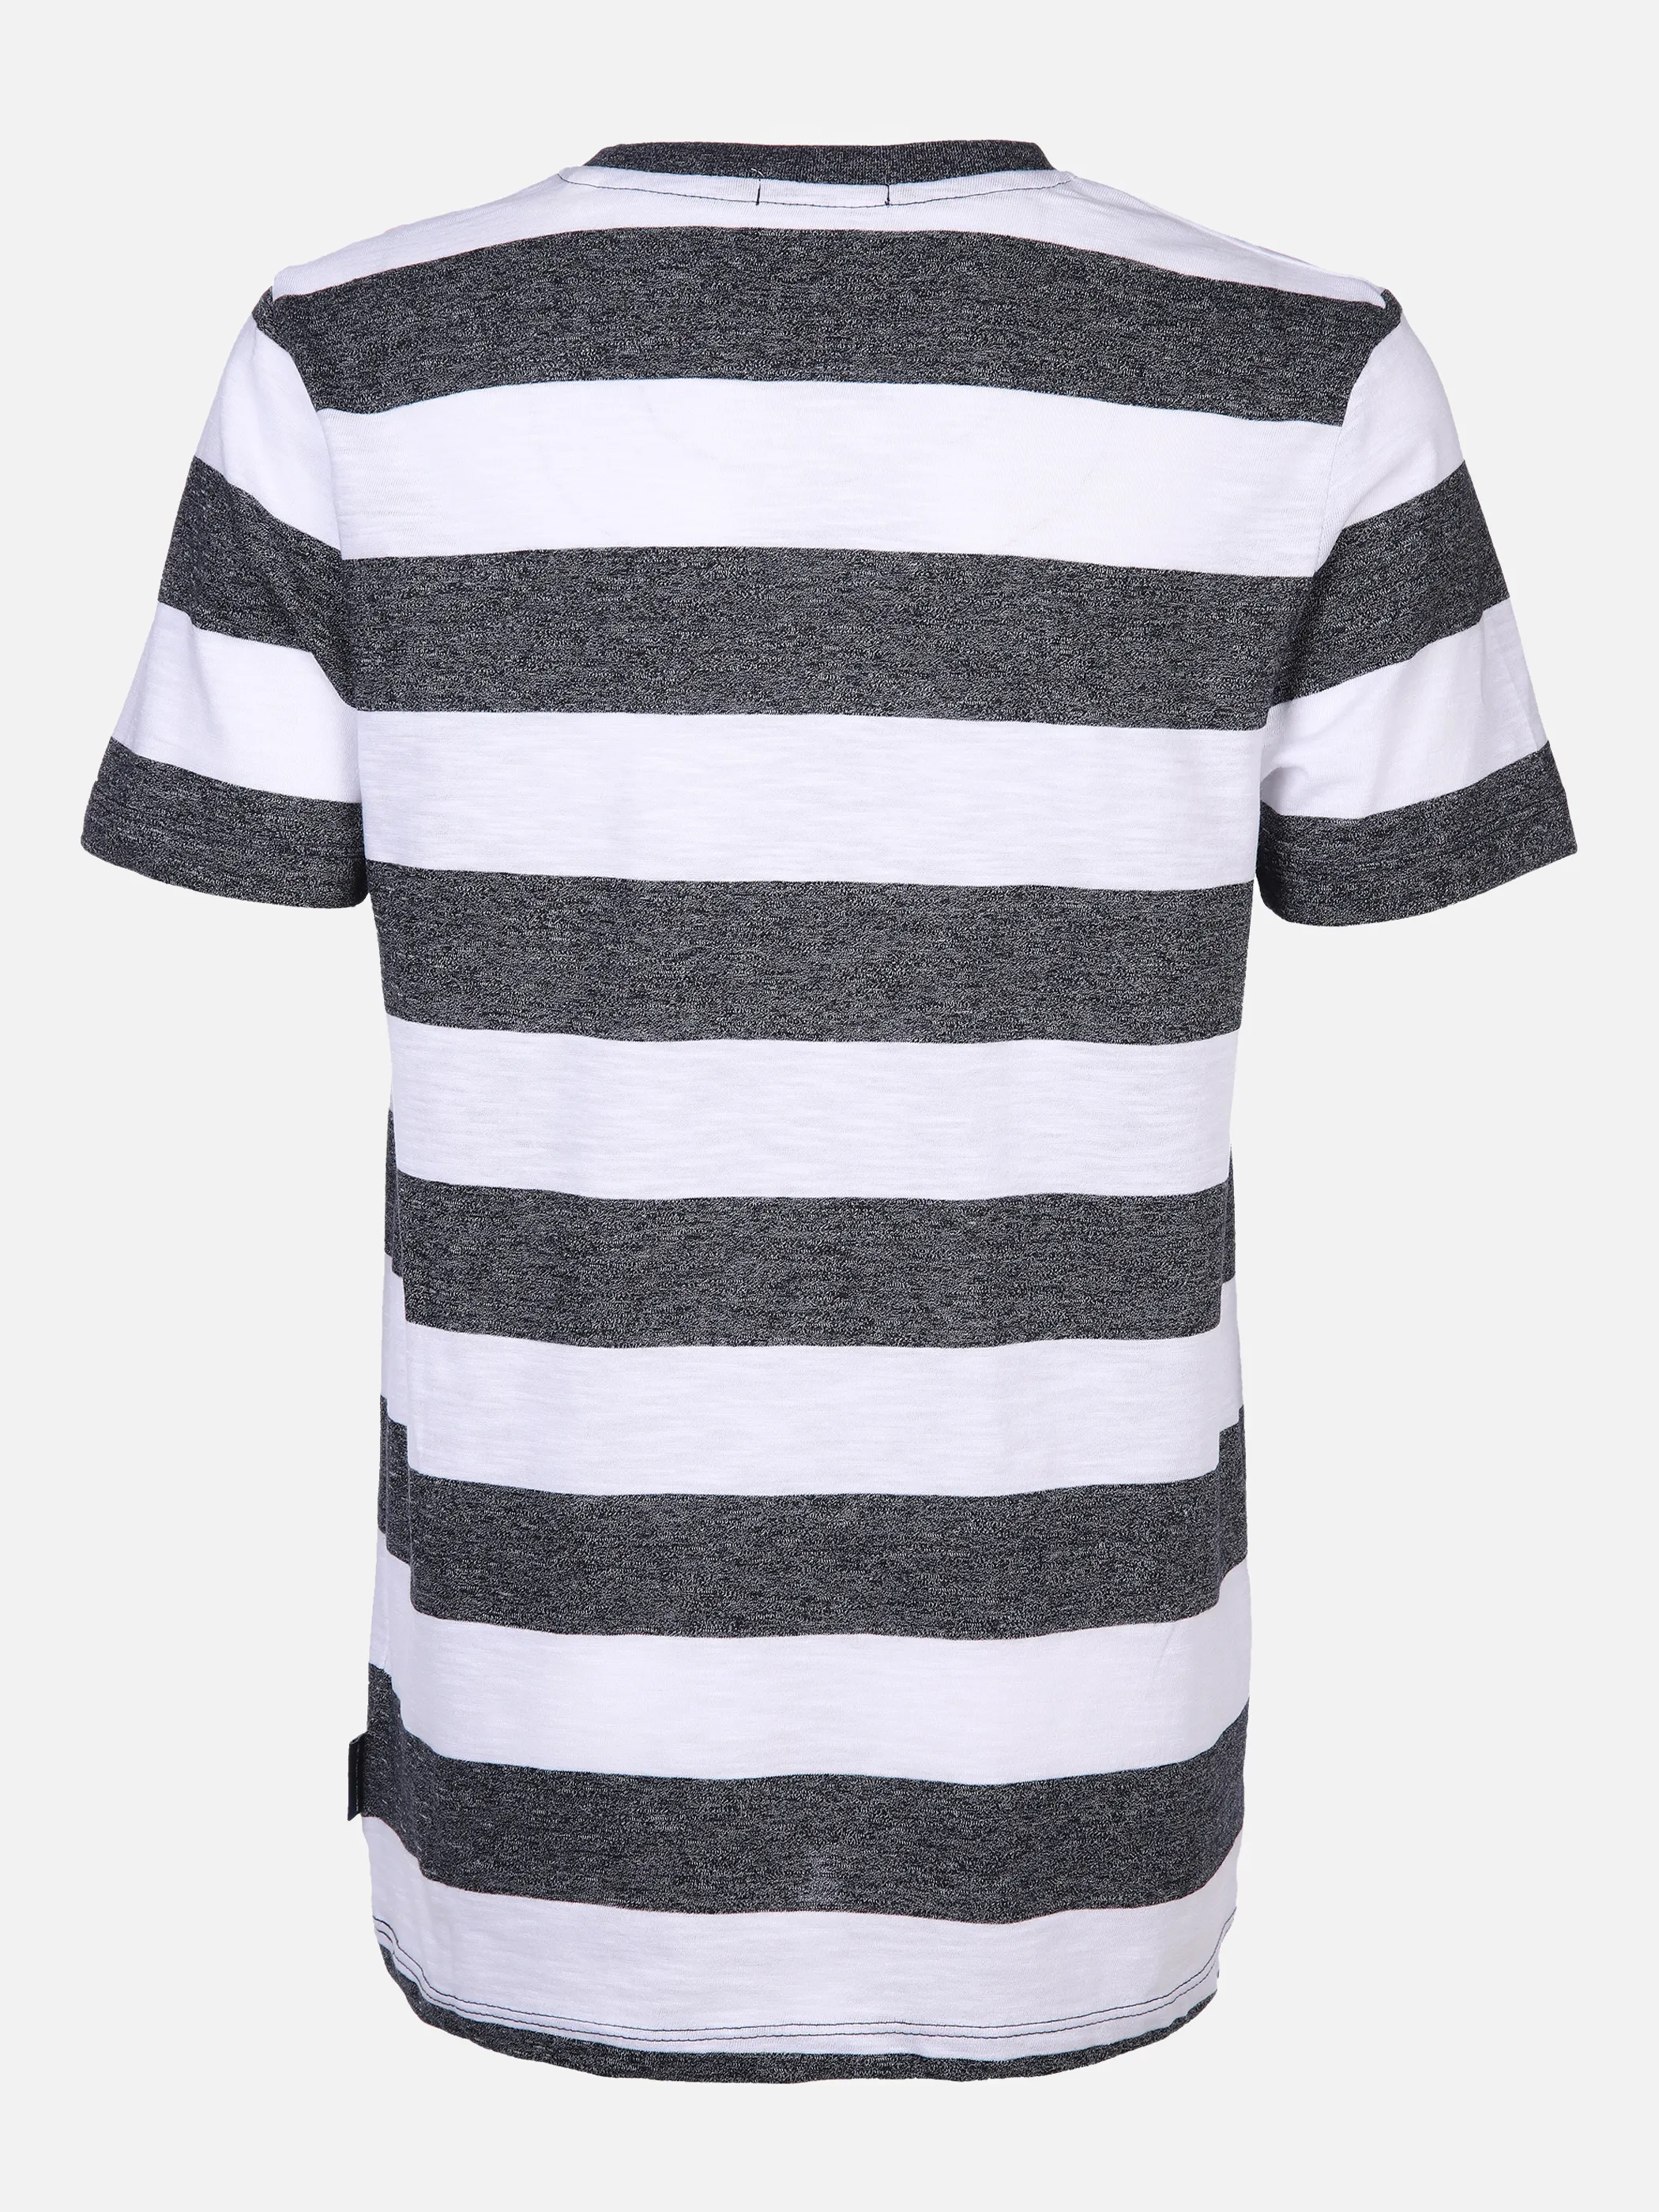 Tom Tailor 1030299 fitted striped t-shirt Blau 860529 29013 2